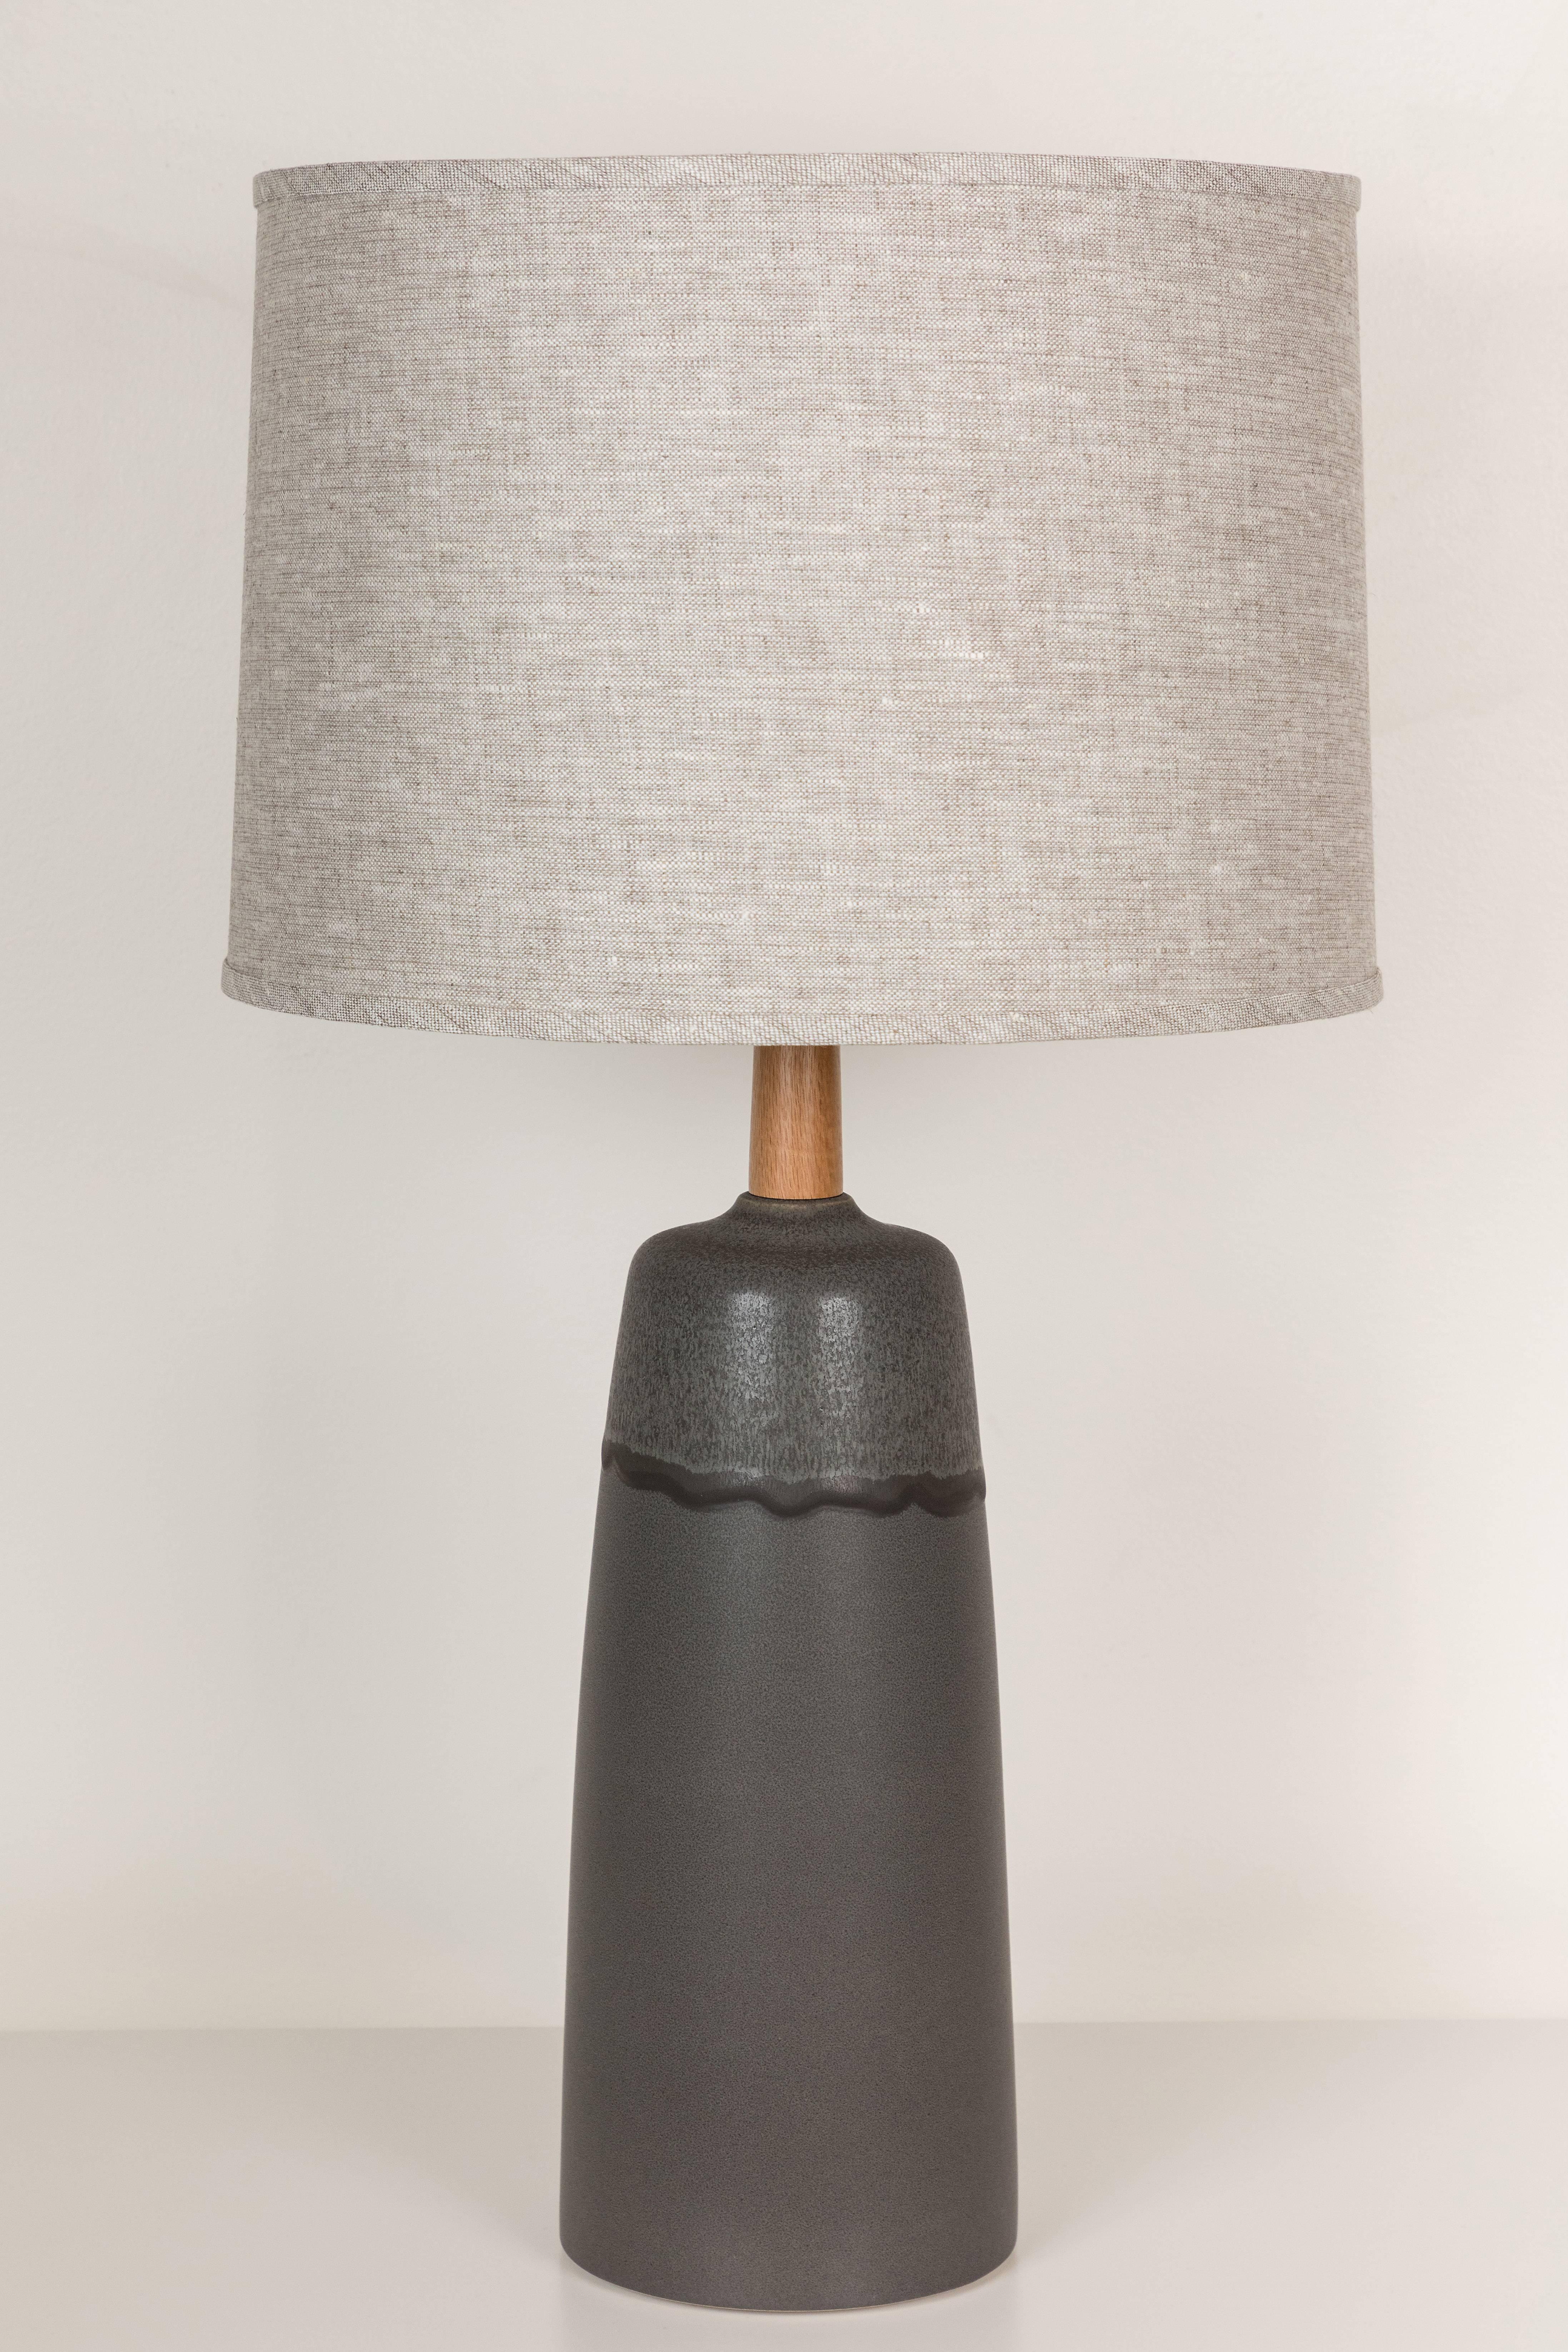 Pair of Tor lamps by Stone and Sawyer for Lawson-Fenning